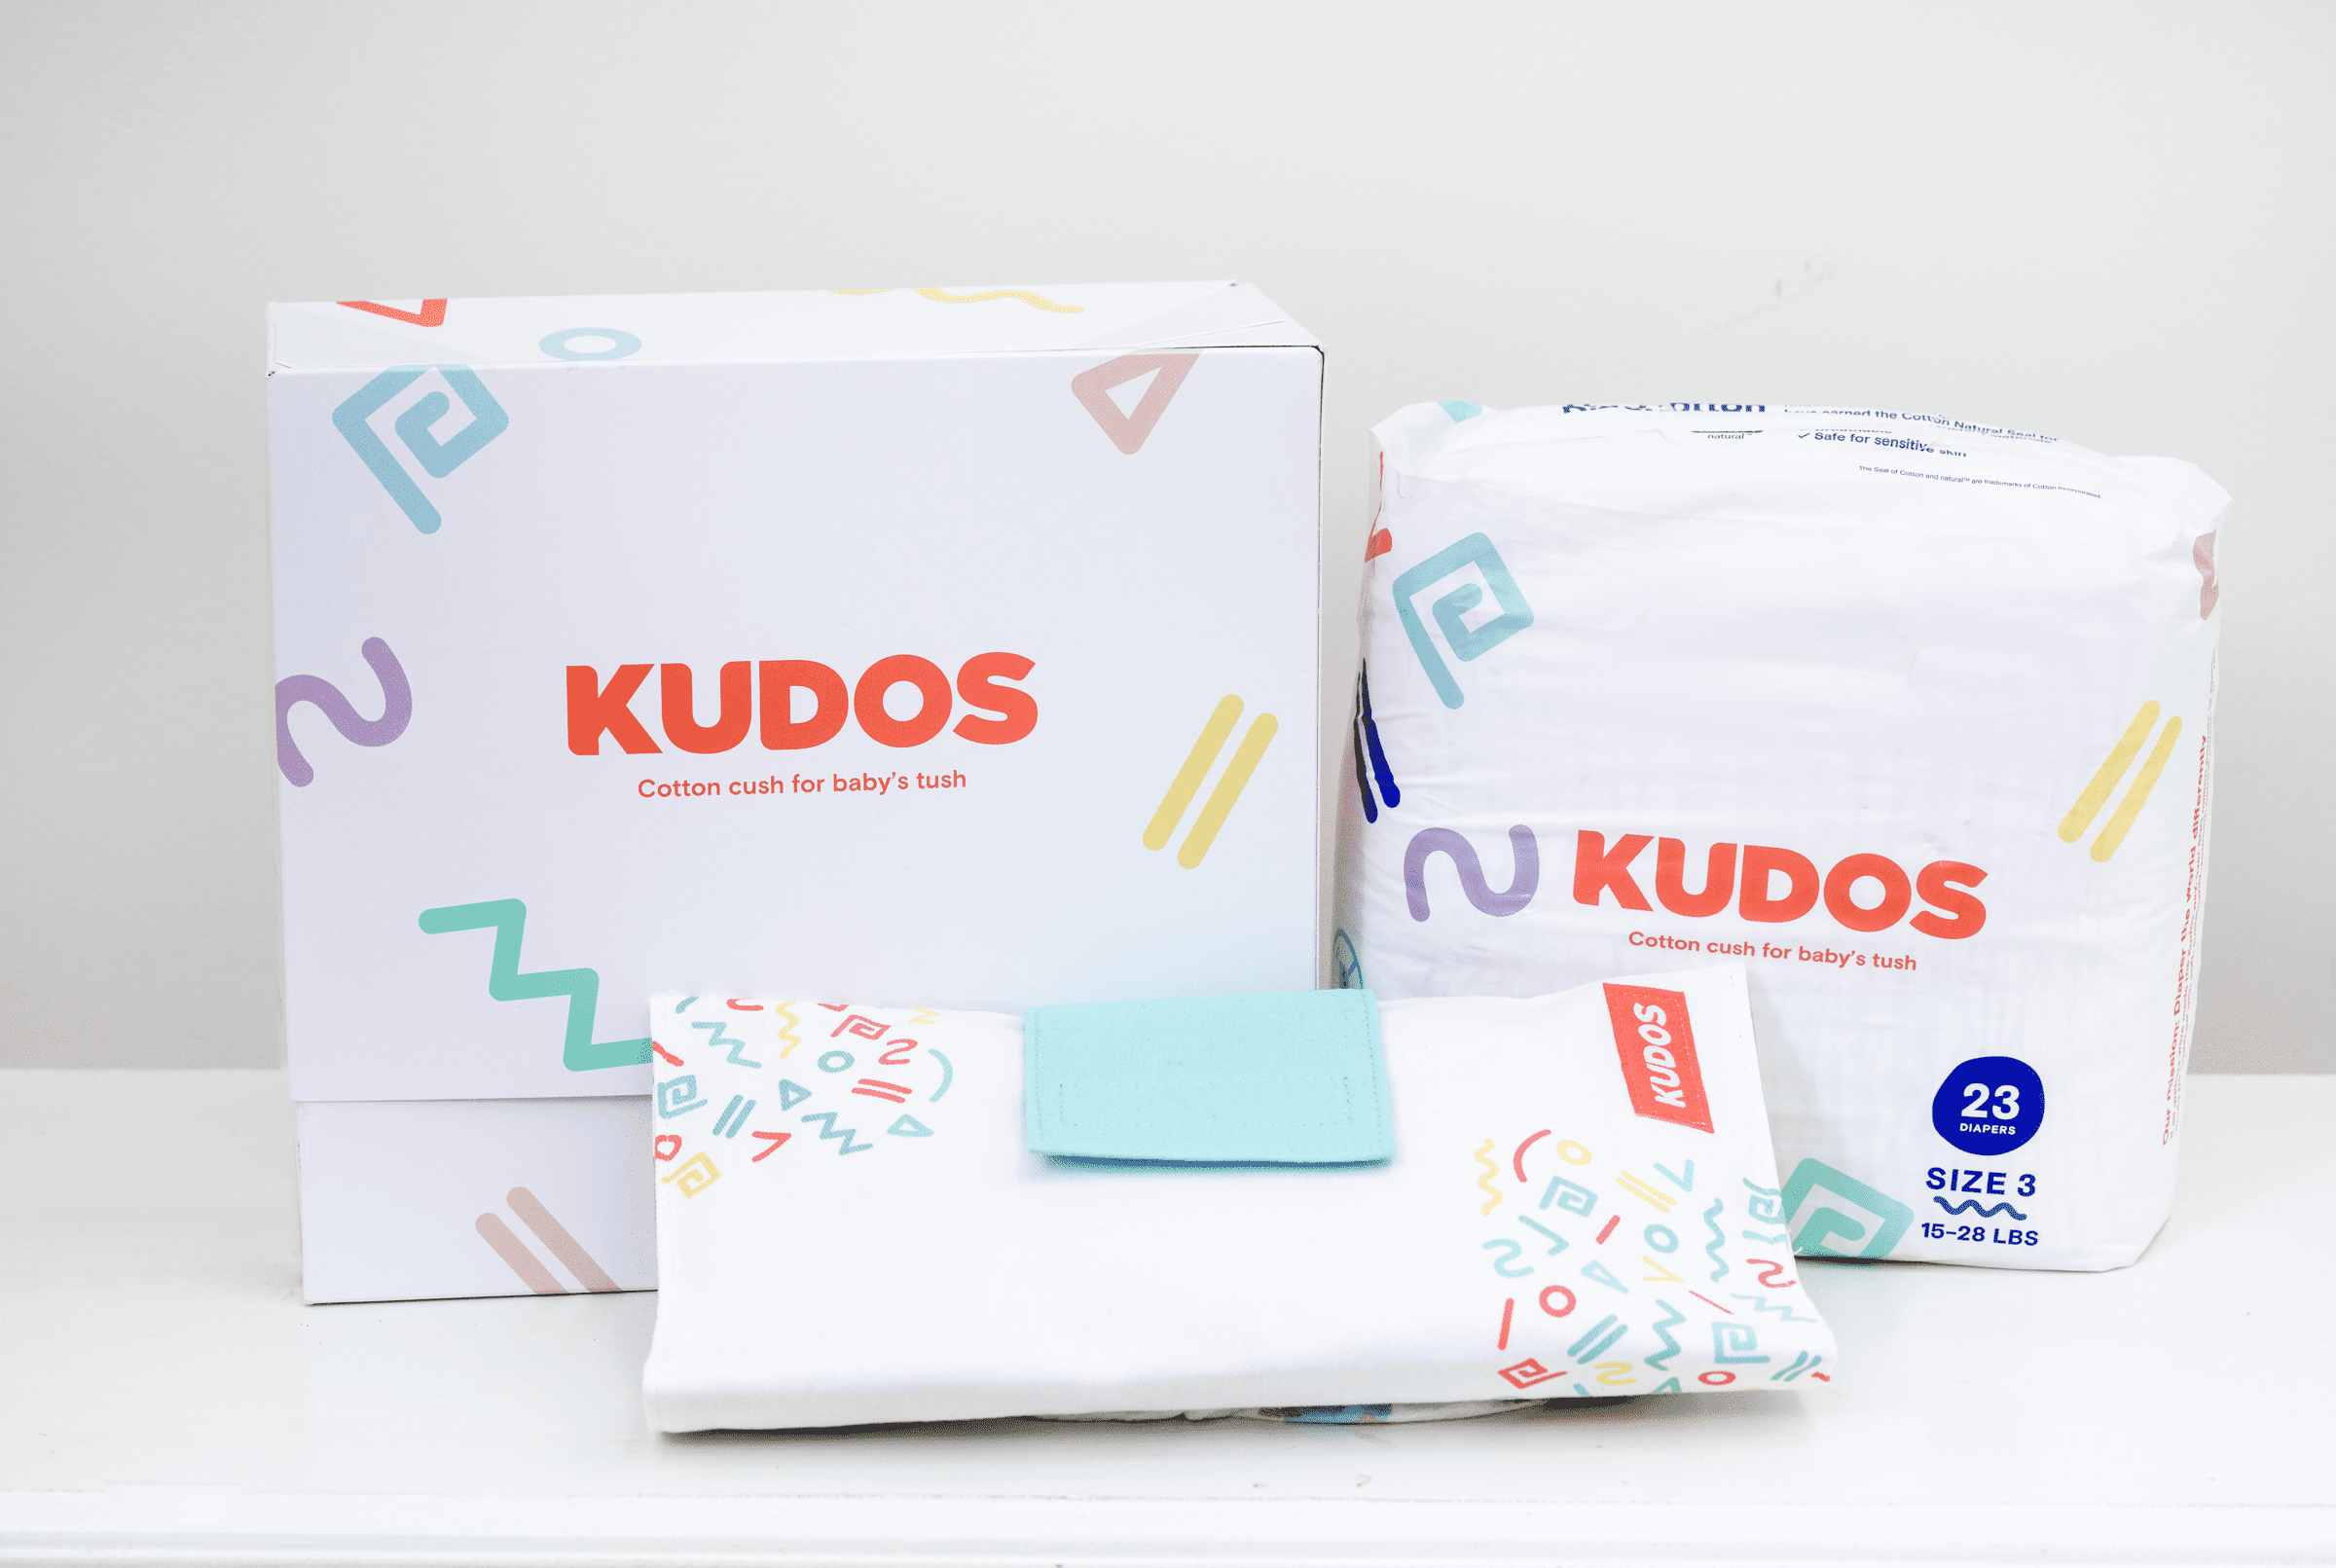 kudos diaper review - packages of kudos diapers against a white background